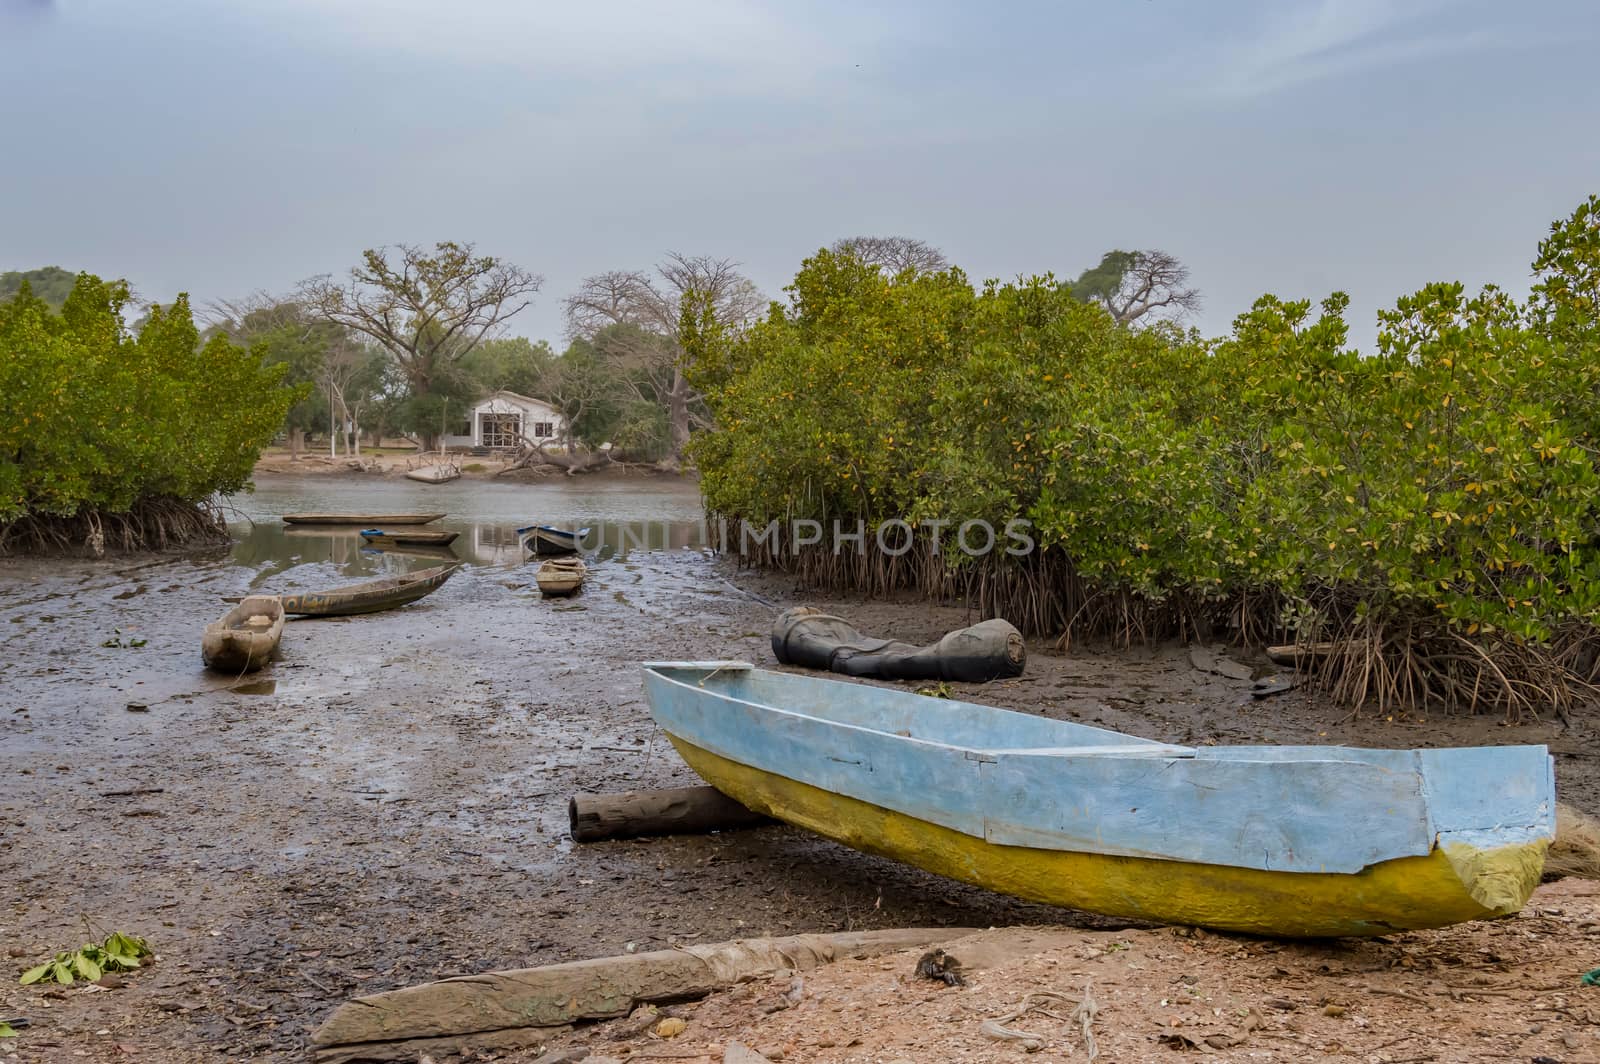 Mangrove area with traditional boats  by Philou1000